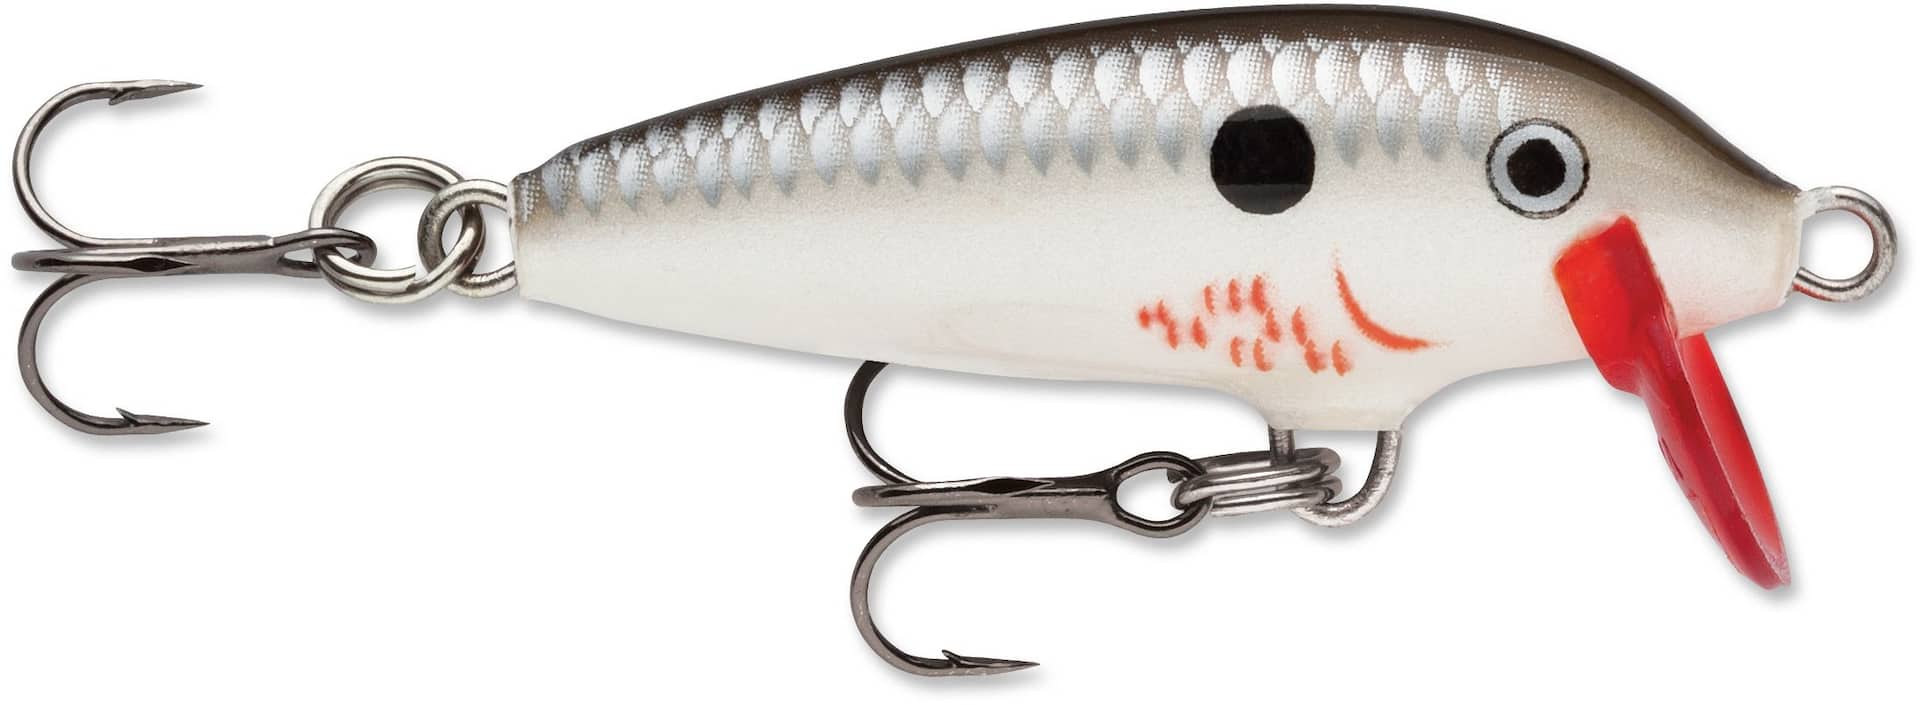  Rapala Countdown 03 Fishing lure, 1.5-Inch, Blue : Sports &  Outdoors